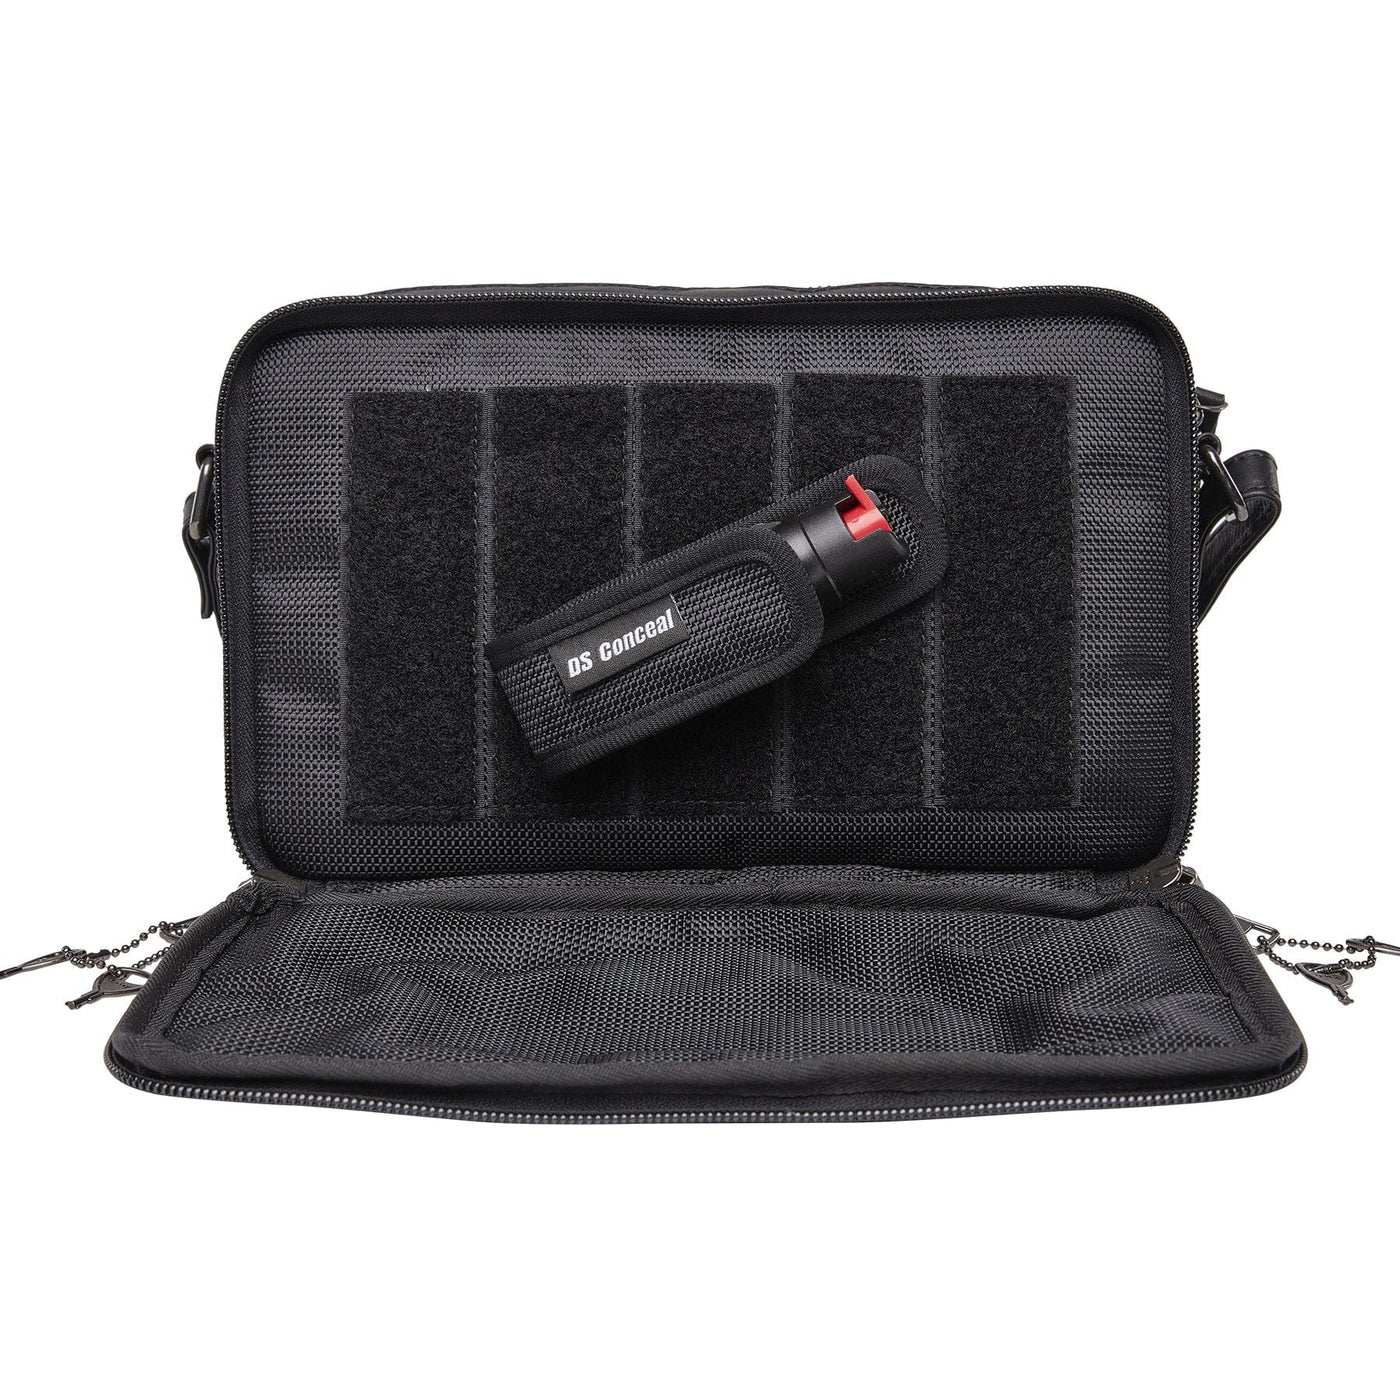 DS Conceal DS Conceal Black pepper spray and taser combo